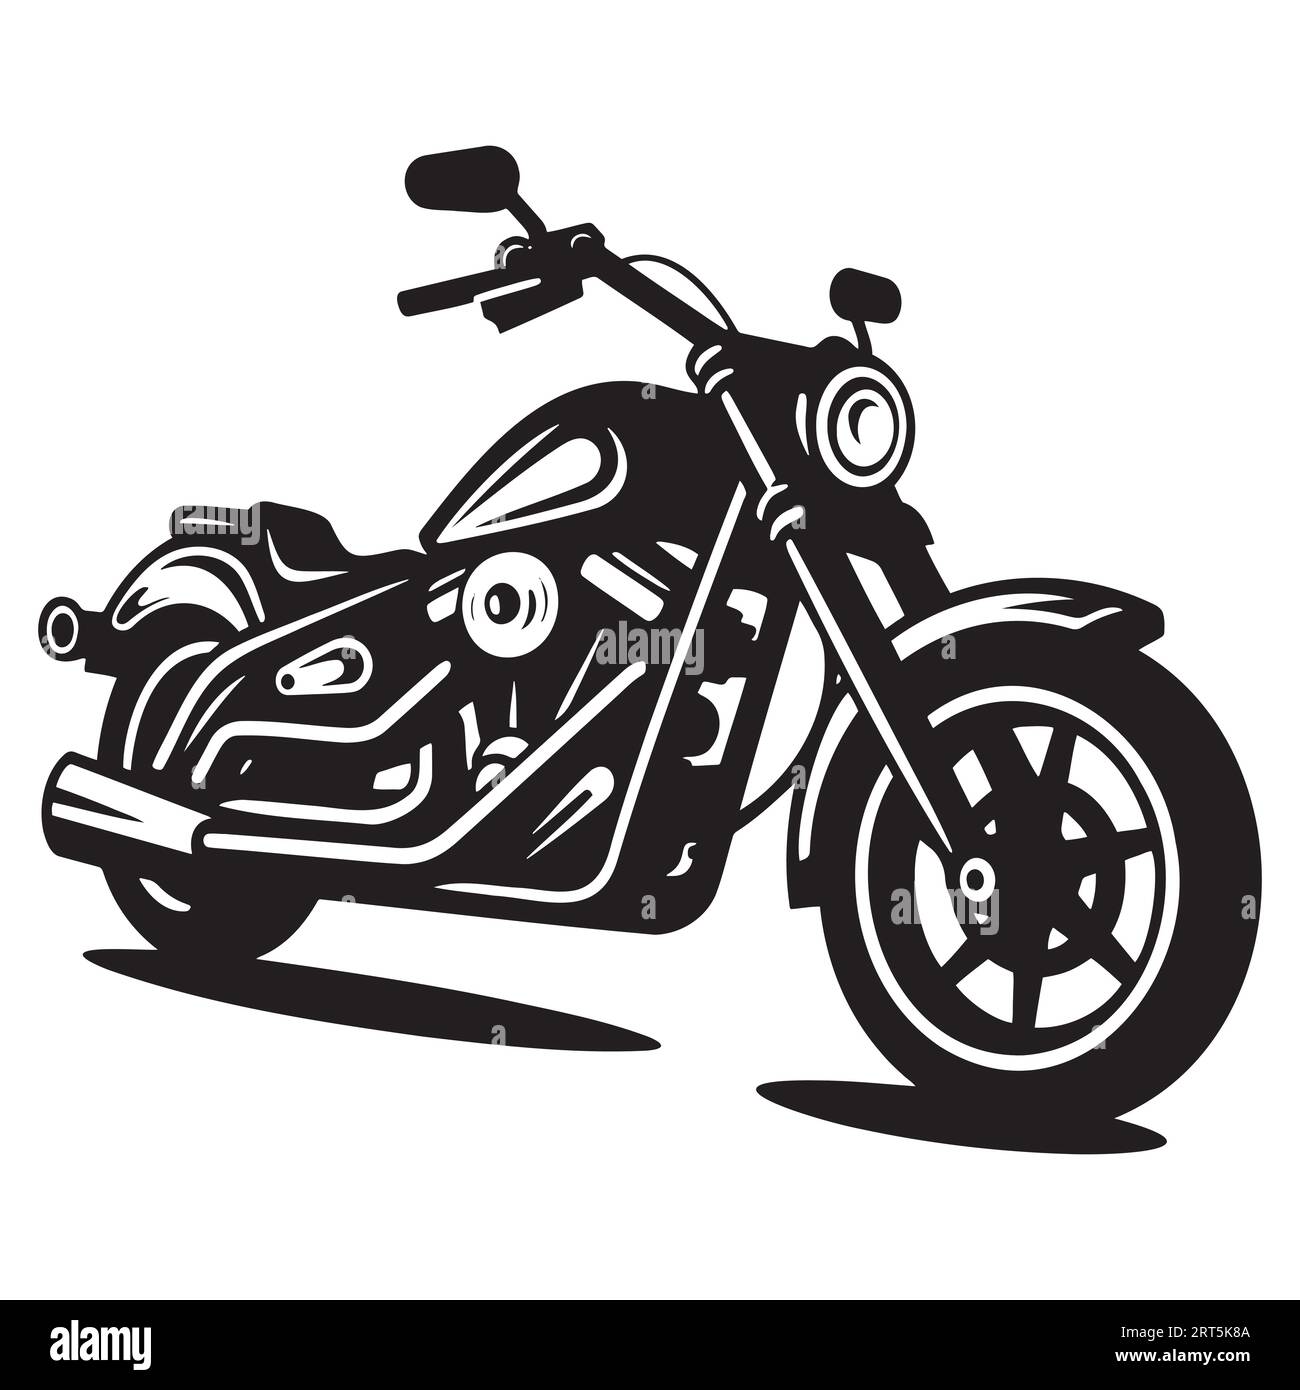 Motorcycle icon or sign. Vector black silhouette of a motorcycle. Stock Vector